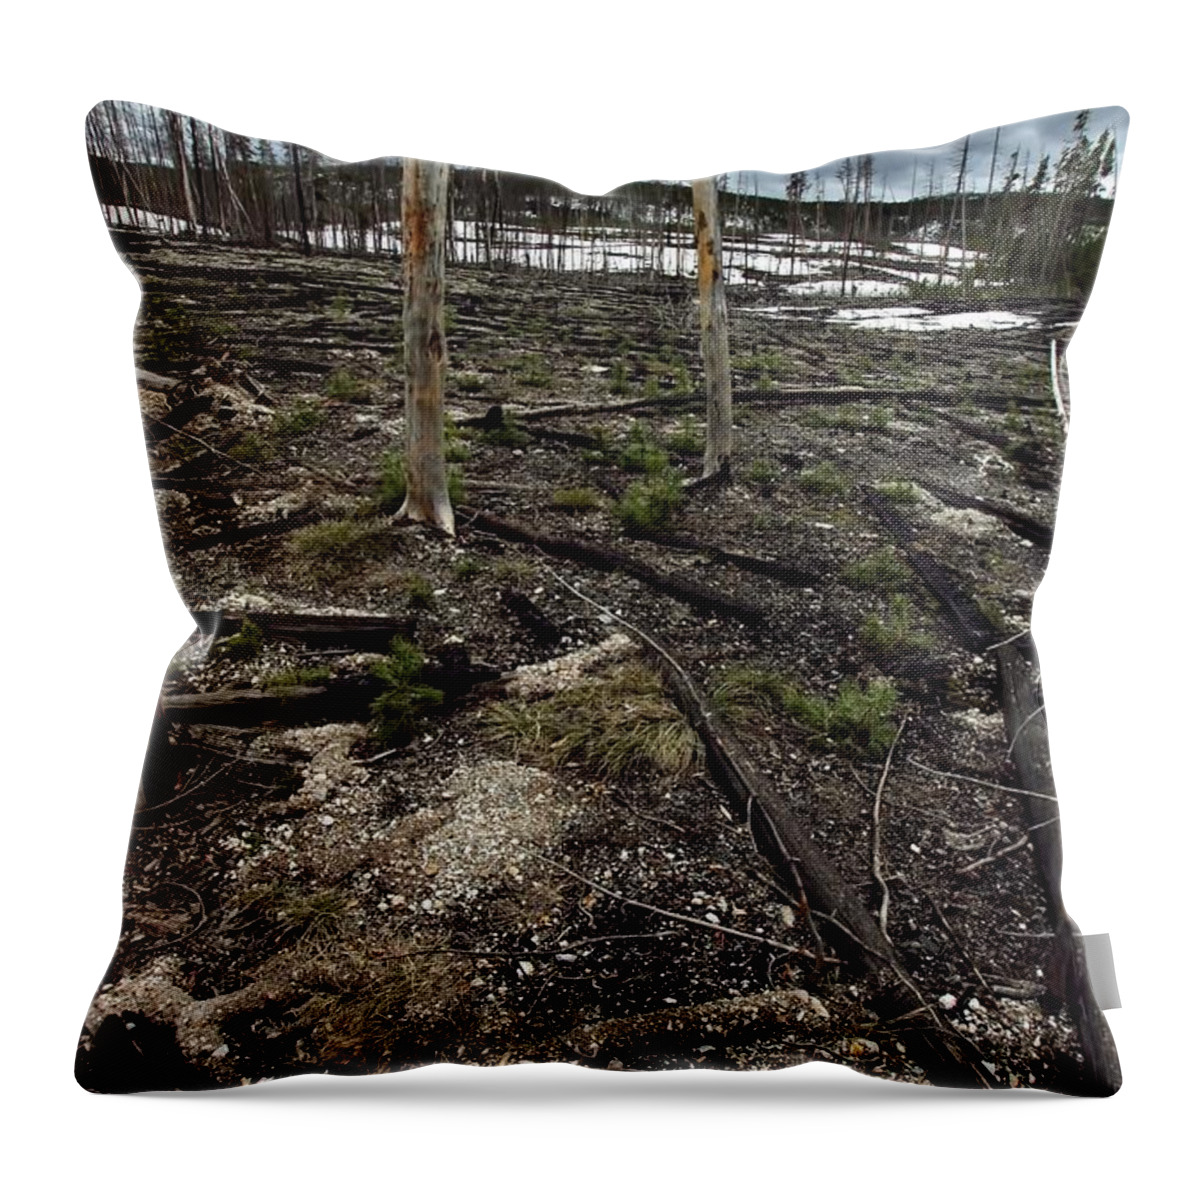 Yellowstone National Park Throw Pillow featuring the photograph Wild Fire Aftermath by Amanda Stadther